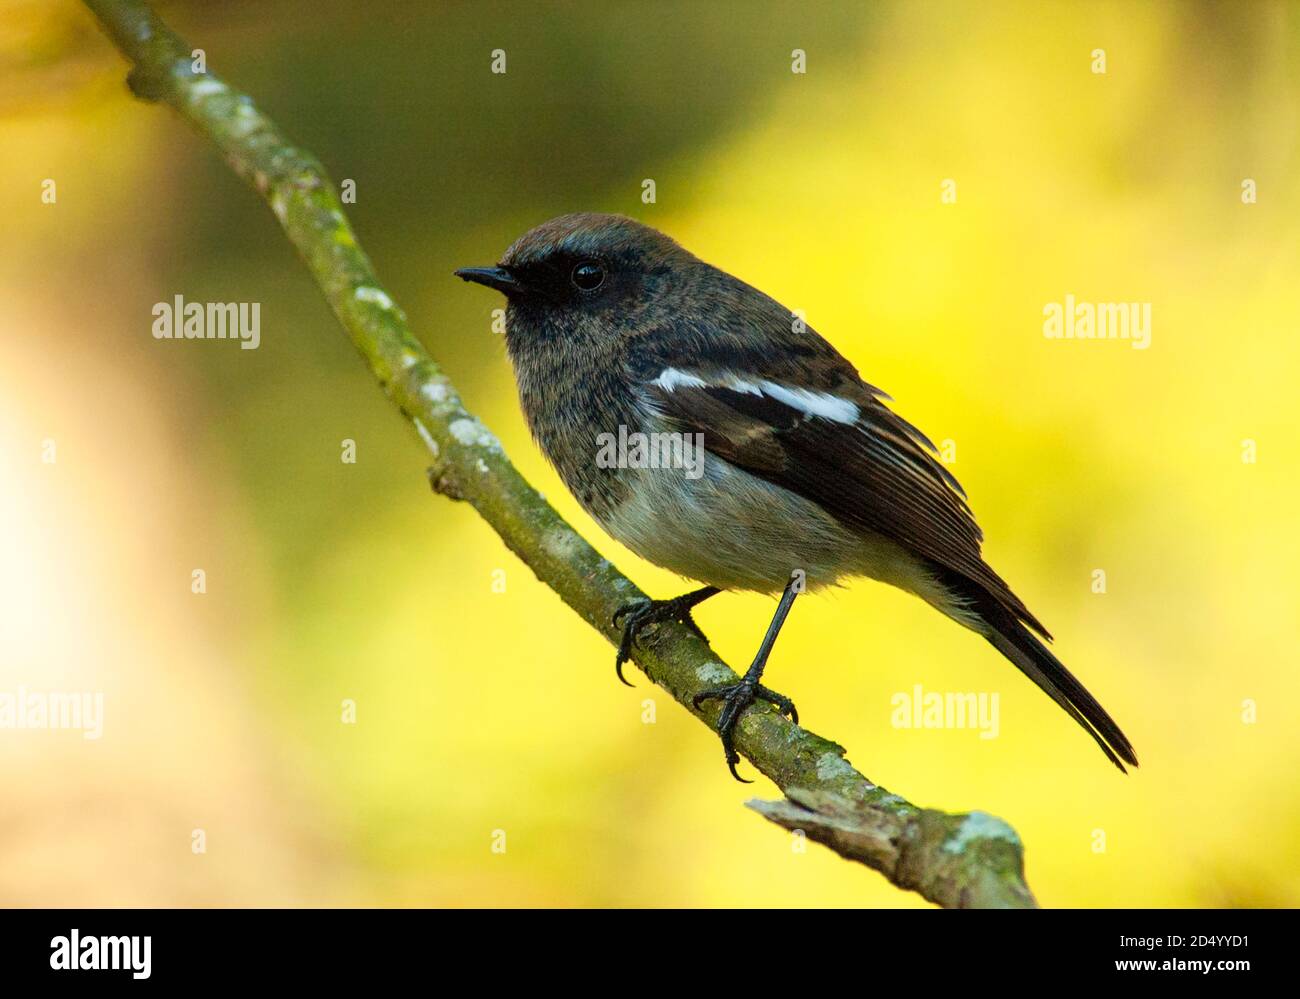 blue-headed redstart (Phoenicurus caeruleocephala), Wintering male in foothills of Himalayas, perched on a branch with a yellow-green natural Stock Photo